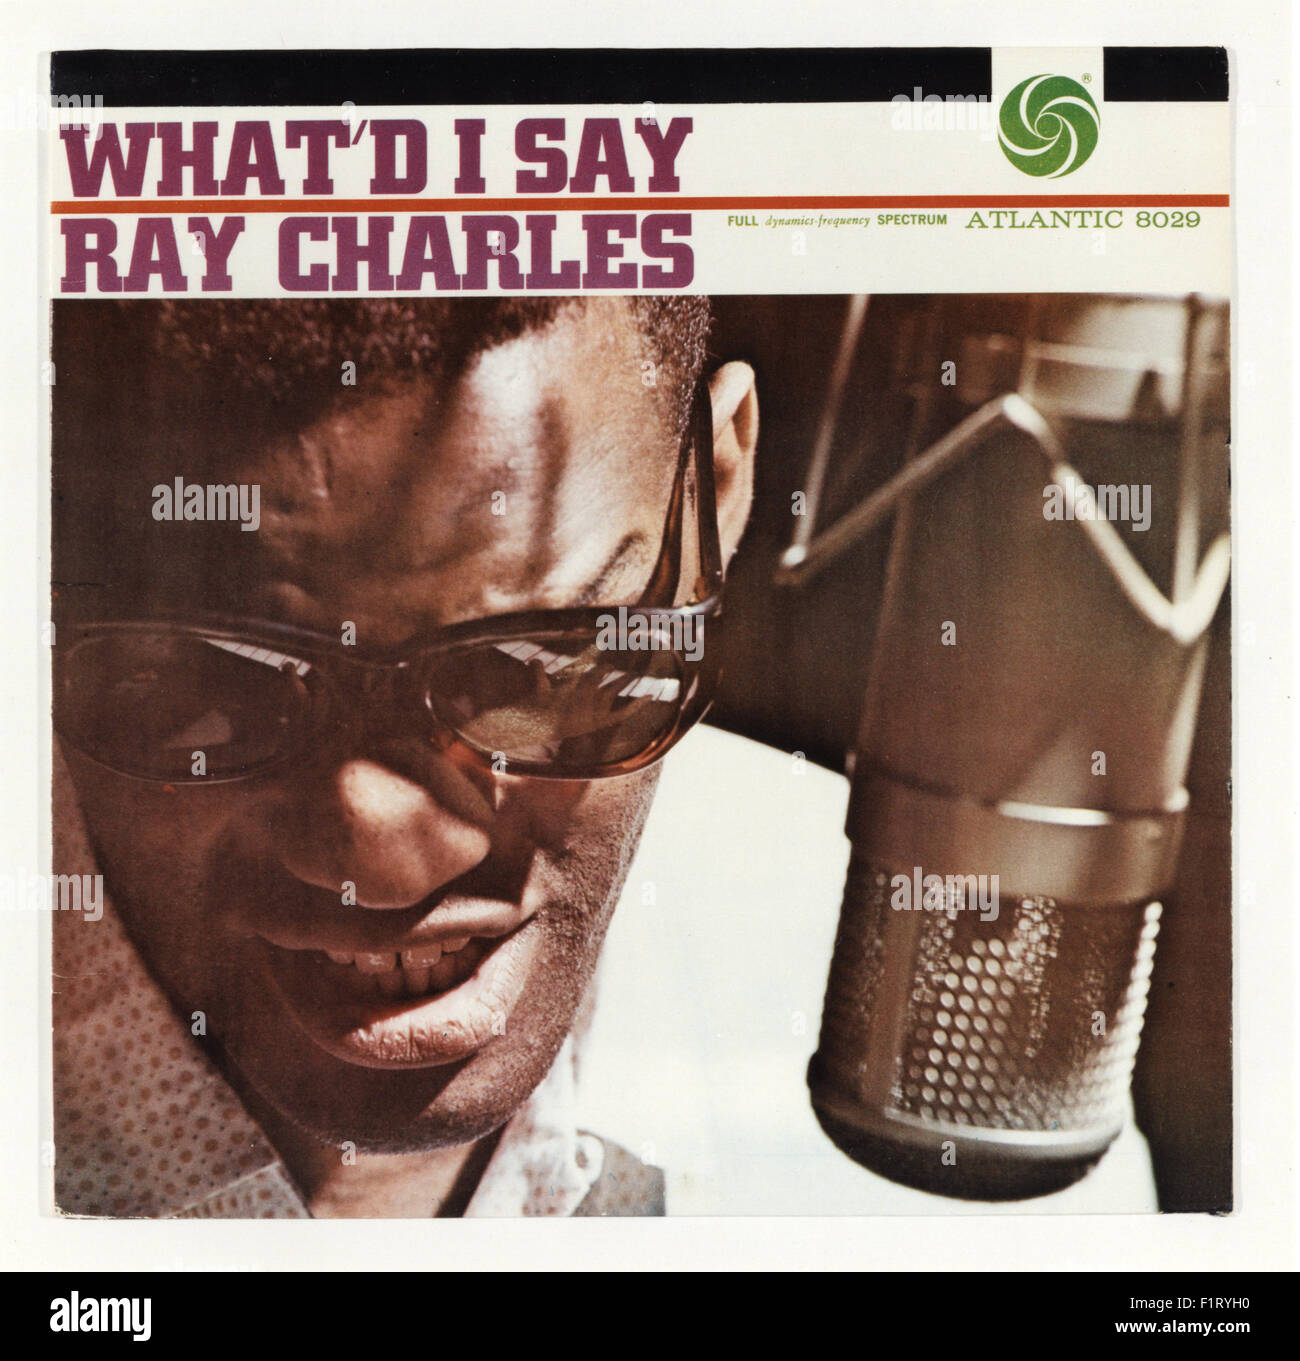 RAY CHARLES, circa 1960s.  Album cover What'd I Say. Courtesy Granamour Weems Collection. Editorial use only. Licensee must obtain appropriate permissions and clearances before using this photo. No rights are granted or implied. Stock Photo